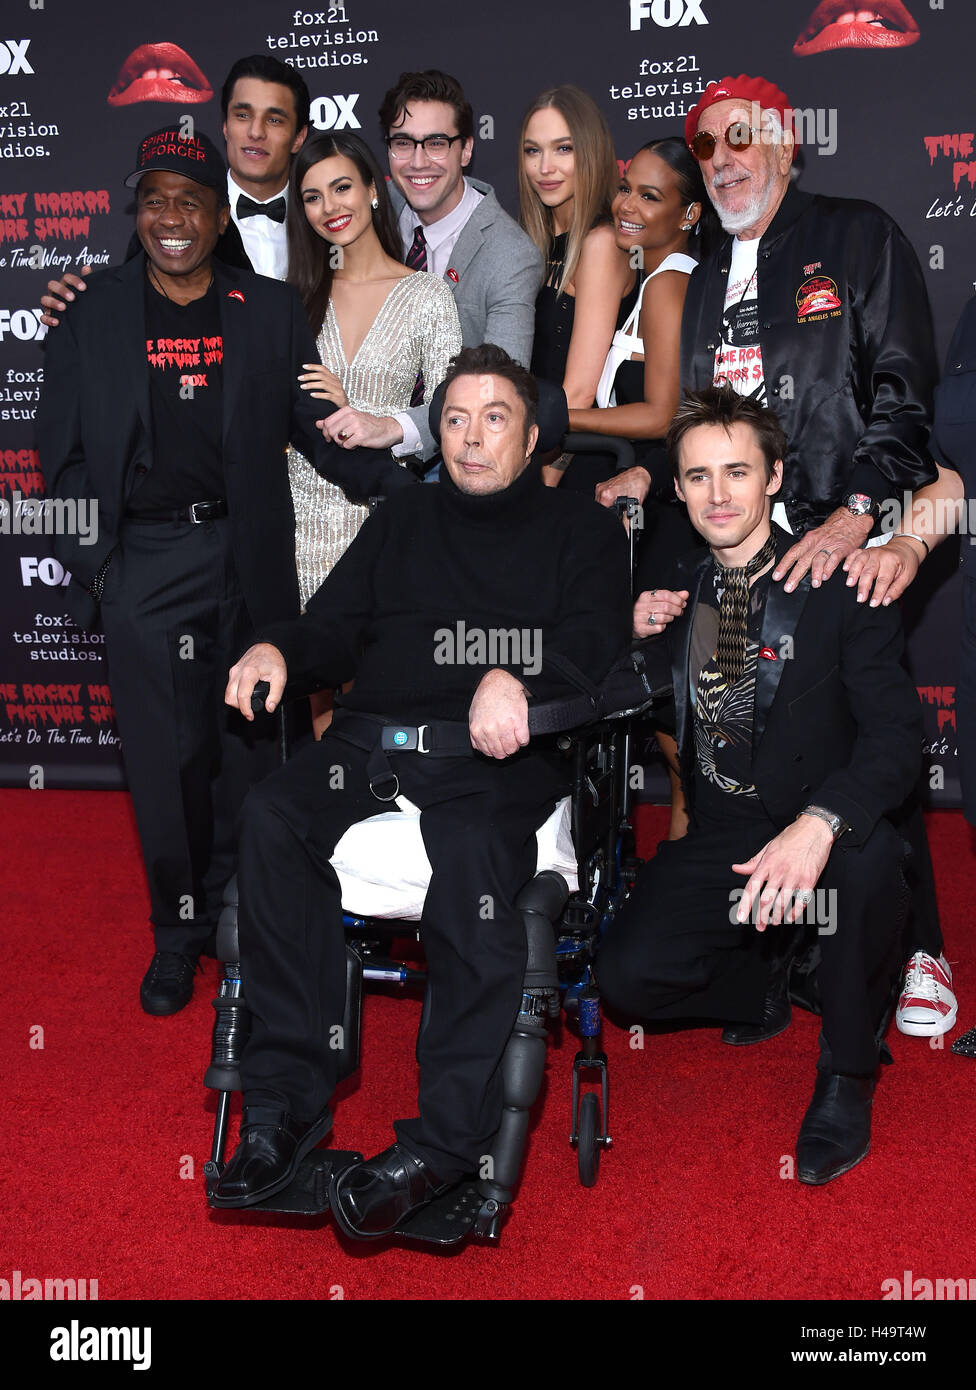 West Hollywood, California, USA. 13th Oct, 2016. Staz Nair, Ben Vereen, Victoria Justice, Ryan McCartan, Reeve Carney, Ivy Levan, Christina Milian and Tim Curry arrives for the premiere of ''The Rocky Horror Picture Show; Let's Do The Time Warp Again'' Premiere at the Roxy theater. Credit:  Lisa O'Connor/ZUMA Wire/Alamy Live News Stock Photo